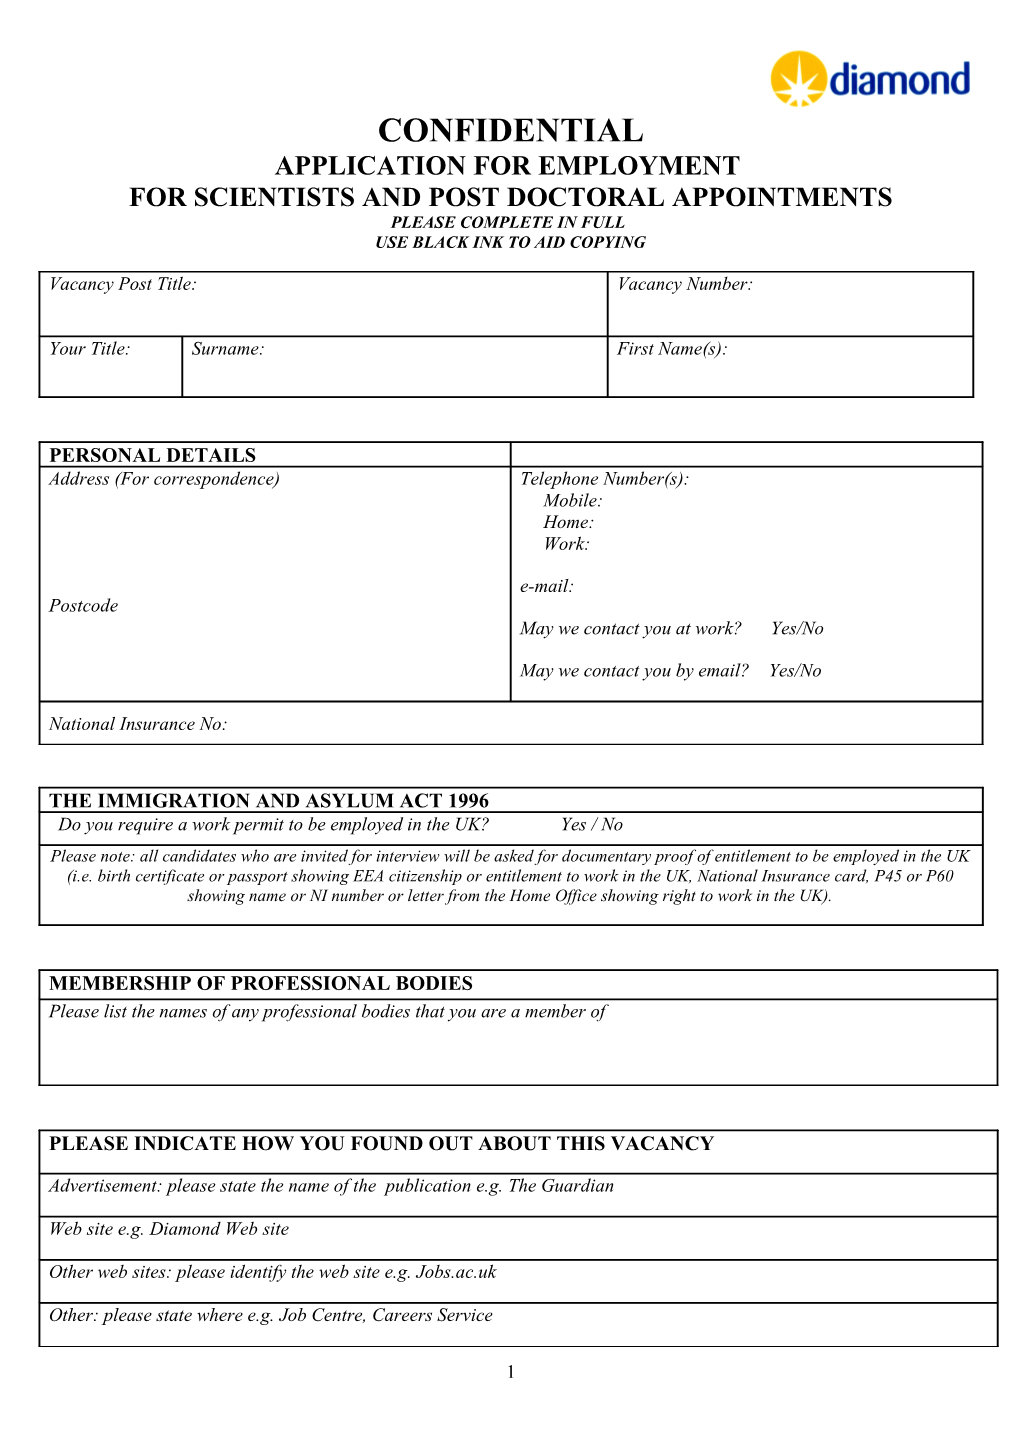 Scientist And PDRA Application Form